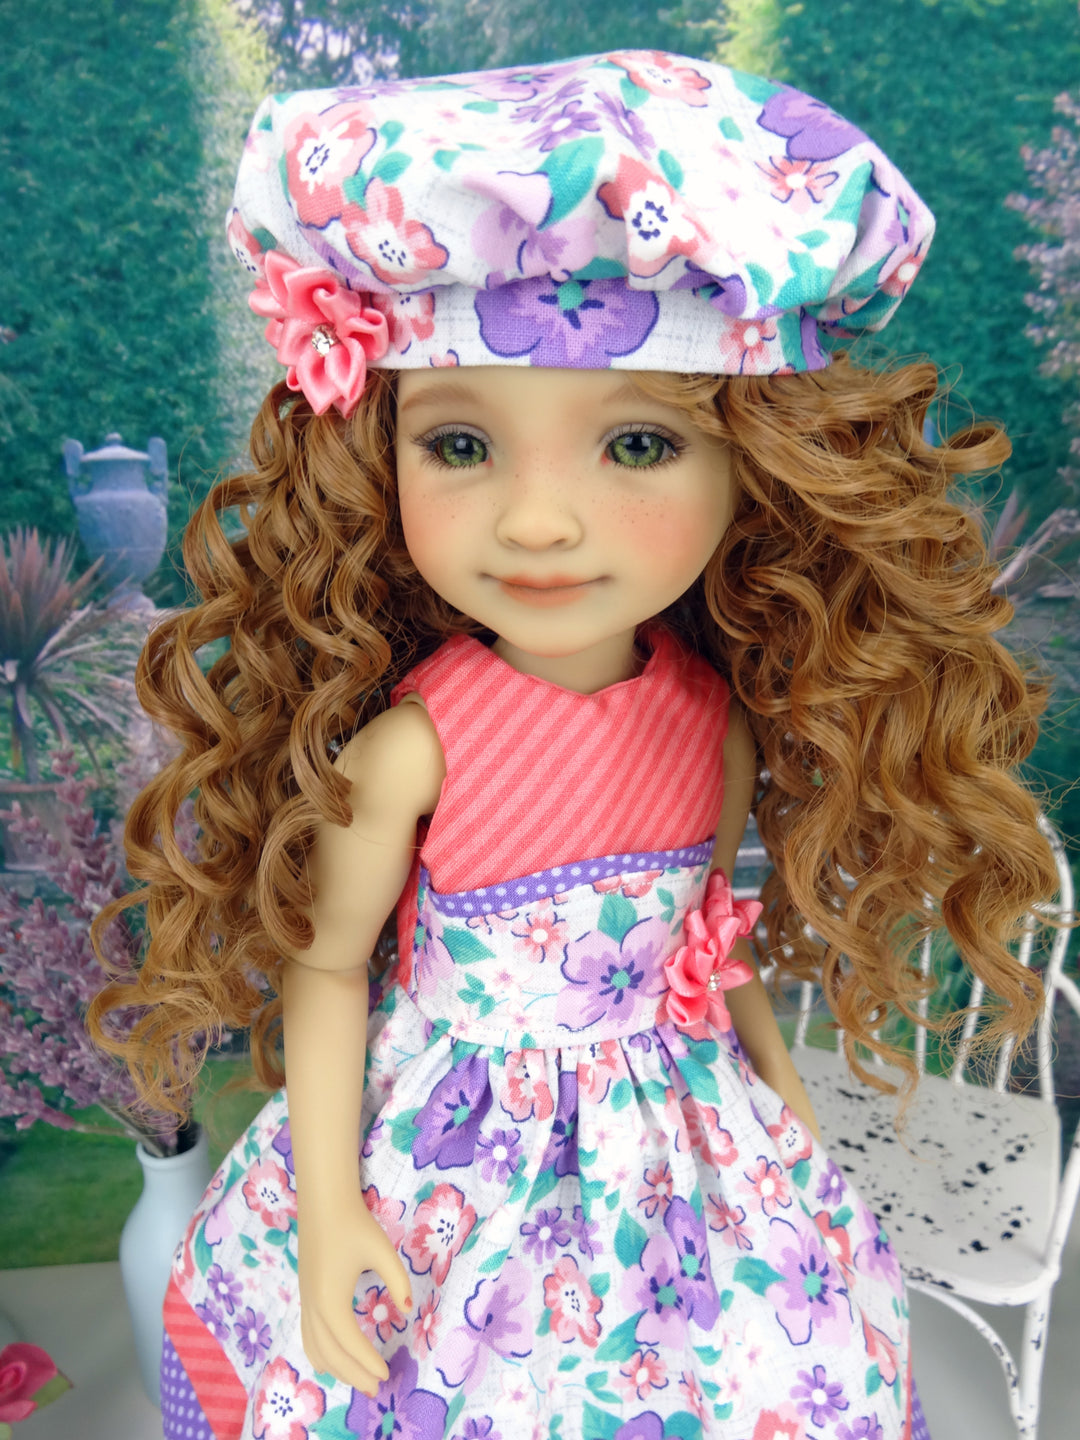 Summer Flowers - dress and shoes for Ruby Red Fashion Friends doll